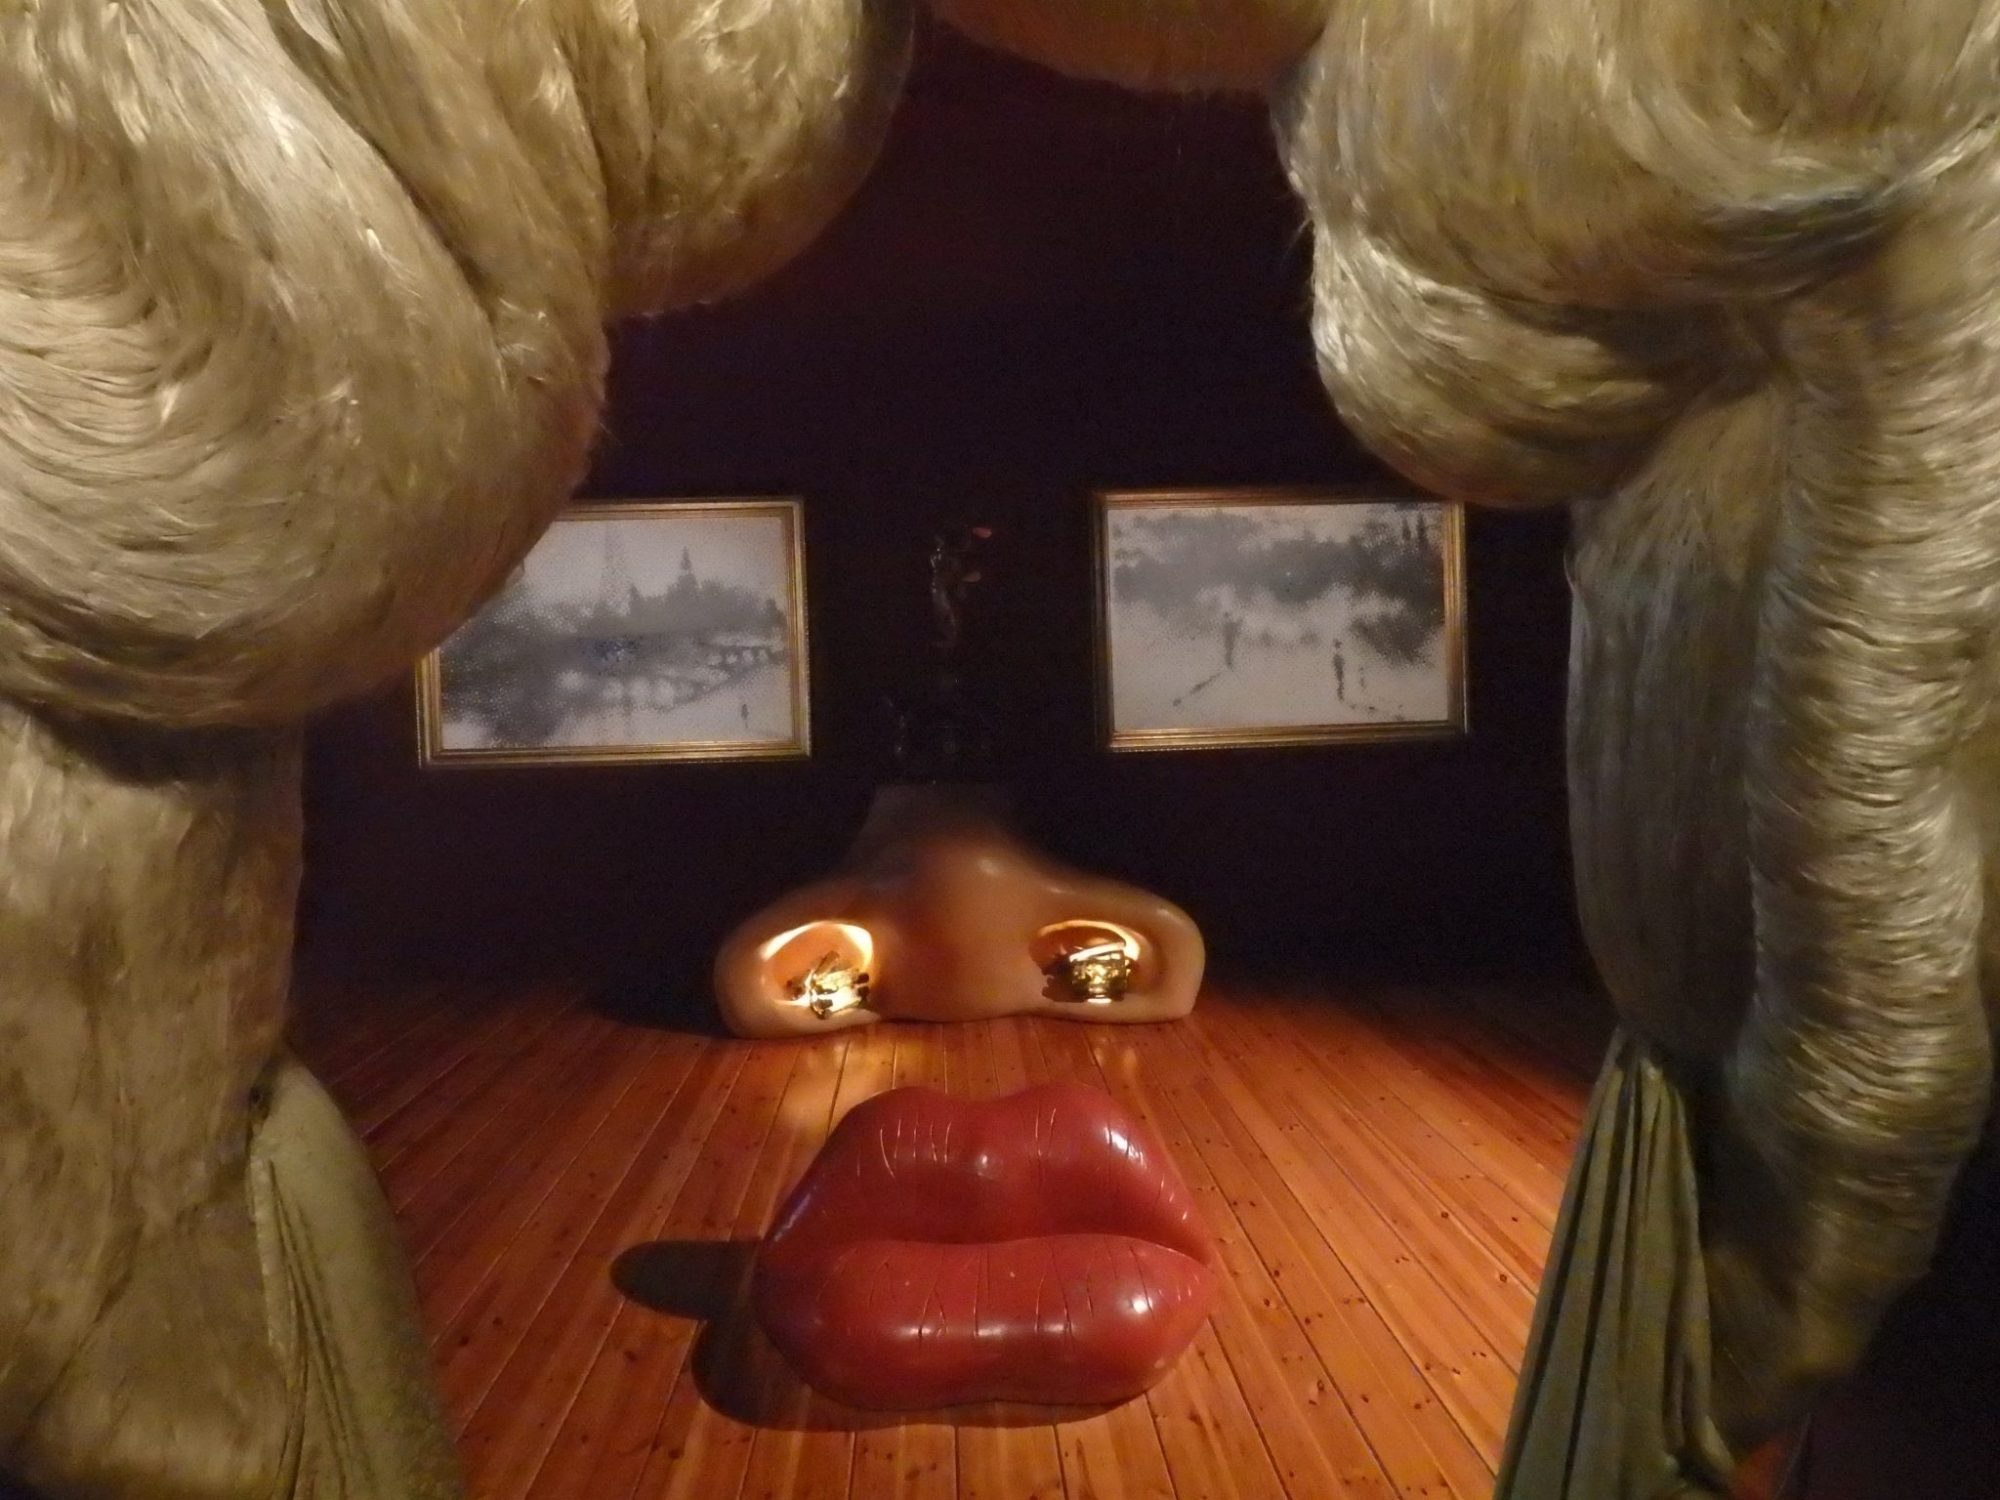 The "hair" fills the left and right sides of the photo. Ahead, on the floor is the lip-shaped sofa. Behind that, the shape of a nose, lit up from inside the nostrils. On the wall behind that: two horizontal paintings that are indistinct, but from this vantage point look like eyes.